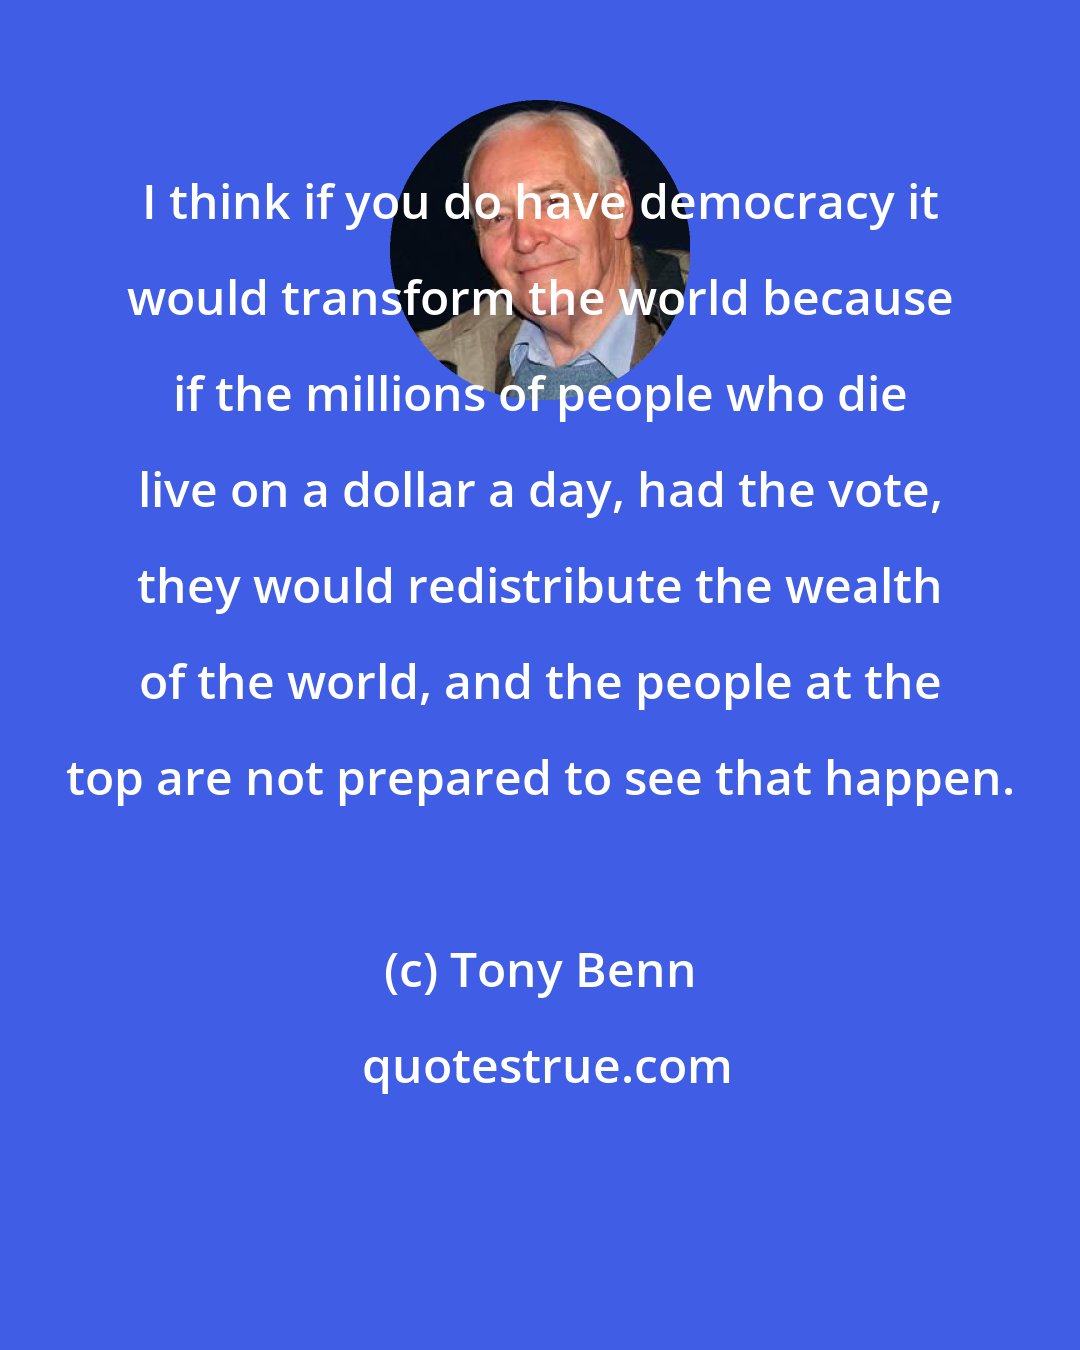 Tony Benn: I think if you do have democracy it would transform the world because if the millions of people who die live on a dollar a day, had the vote, they would redistribute the wealth of the world, and the people at the top are not prepared to see that happen.